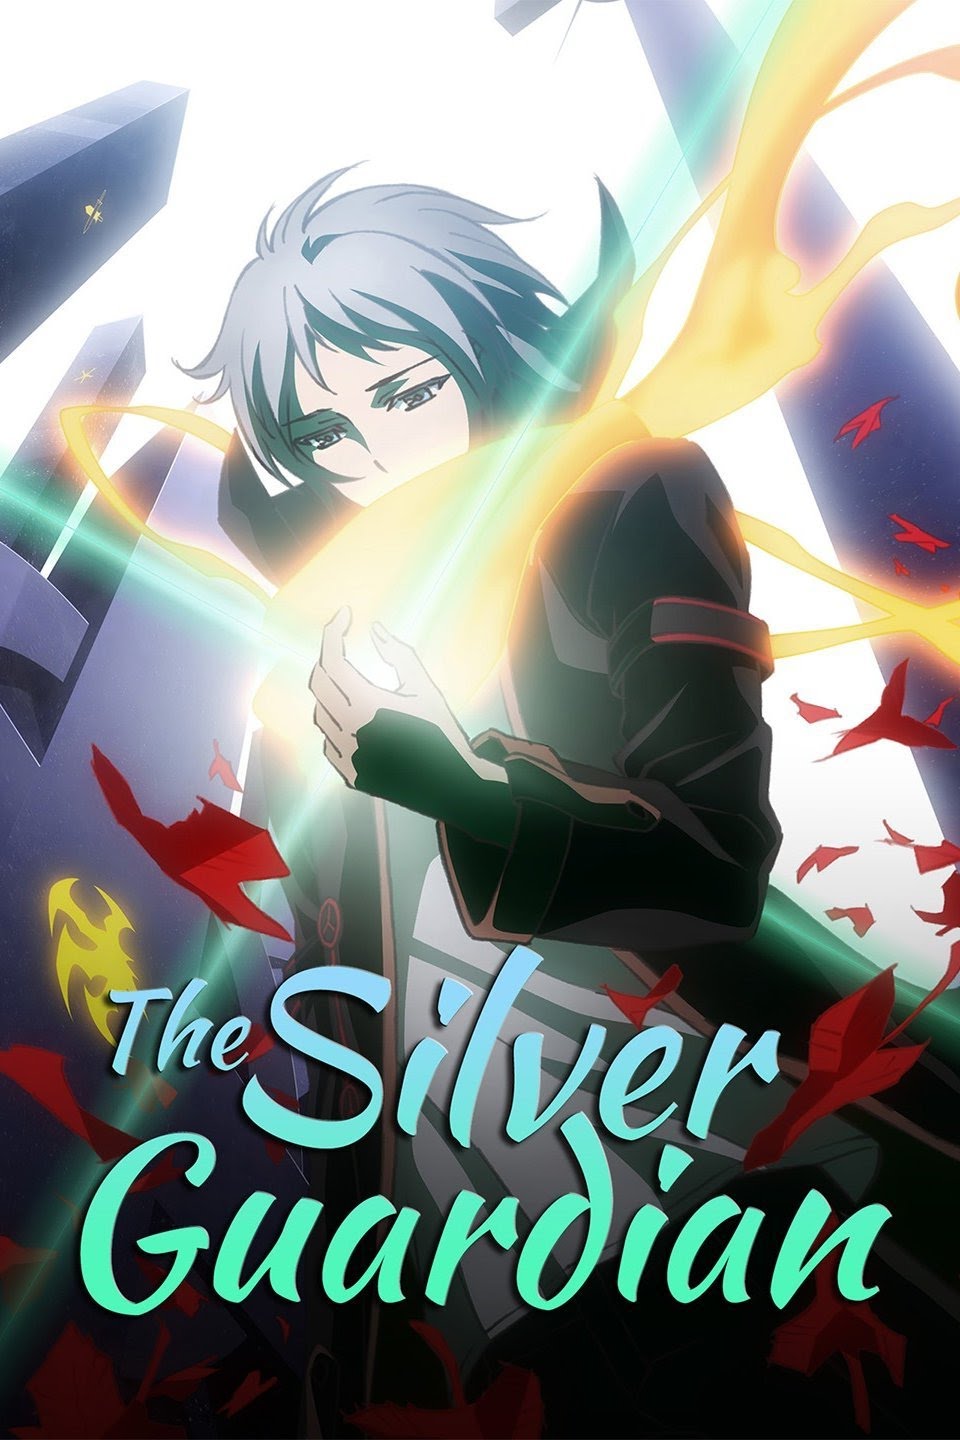 Gin no Guardian (The Silver Guardian) official TV anime site is up